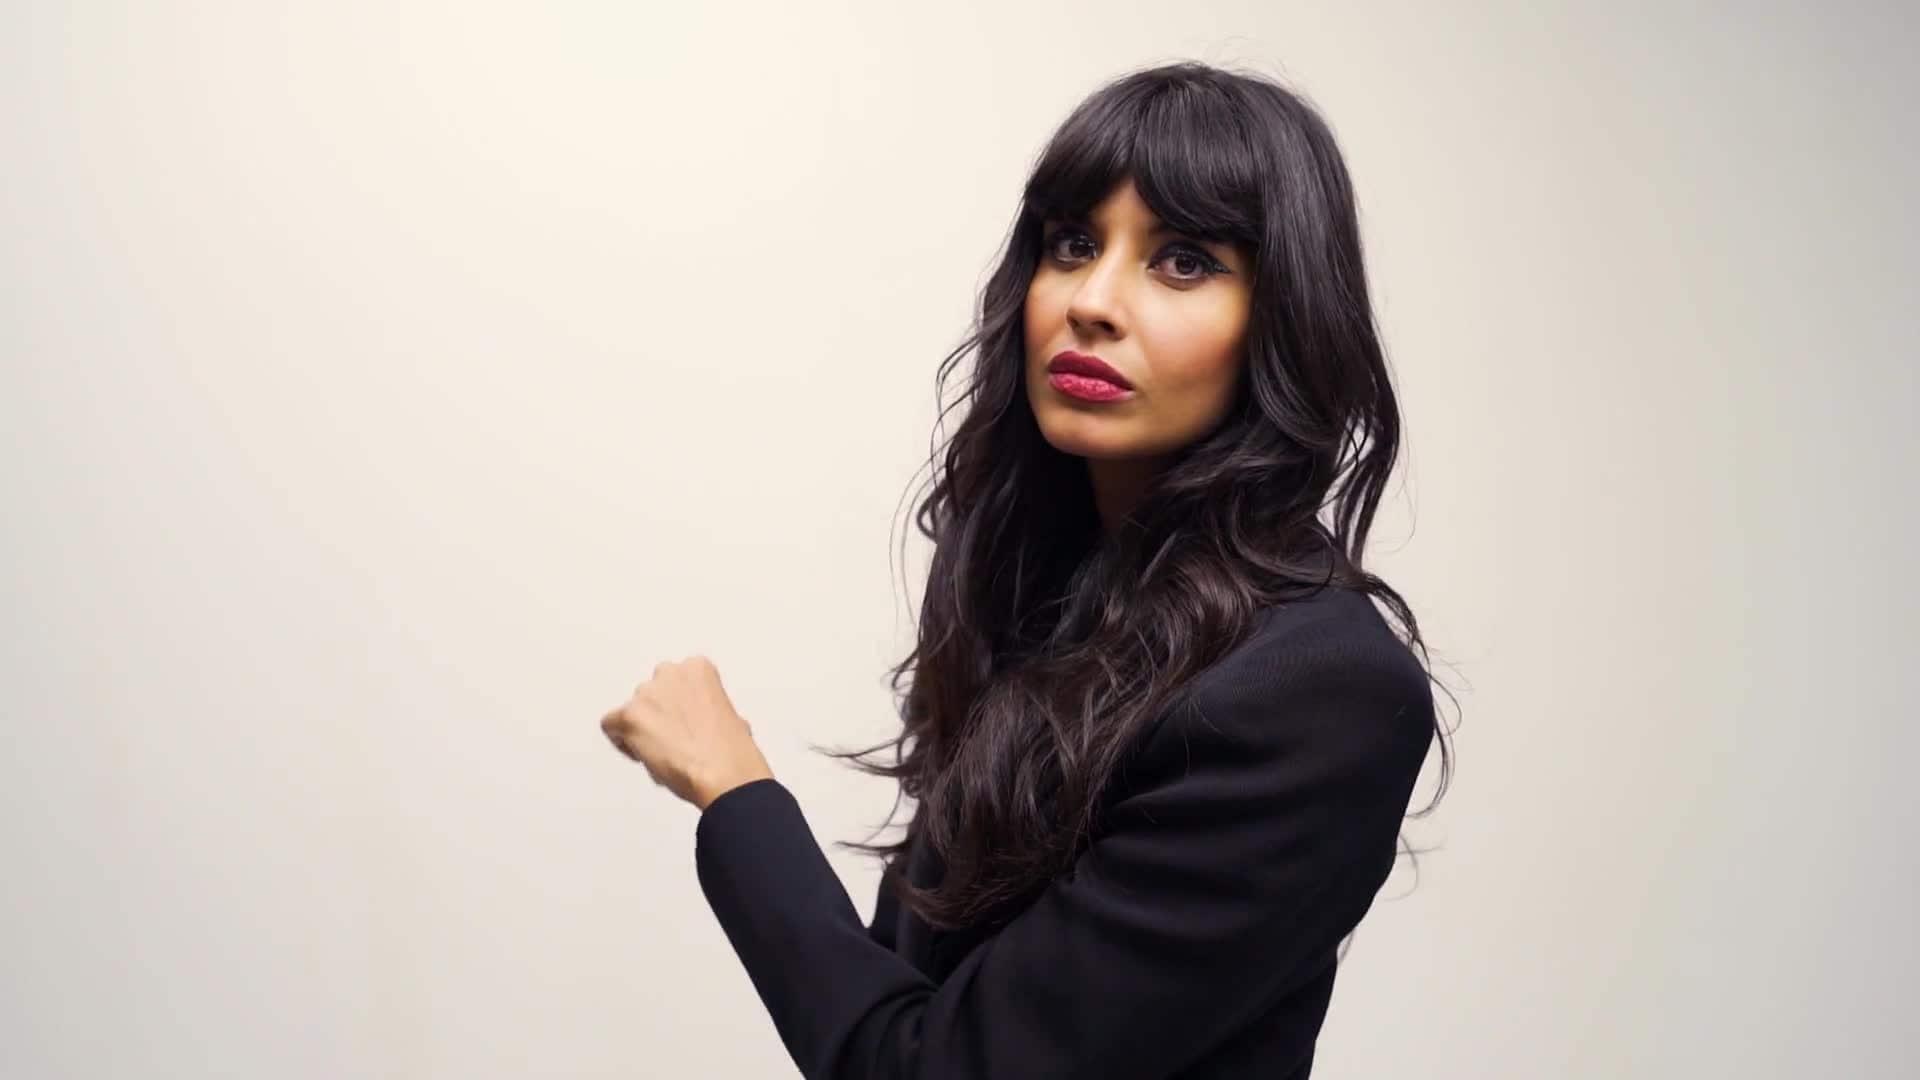 'Destroyed my body': Jameela Jamil on past eating disorder